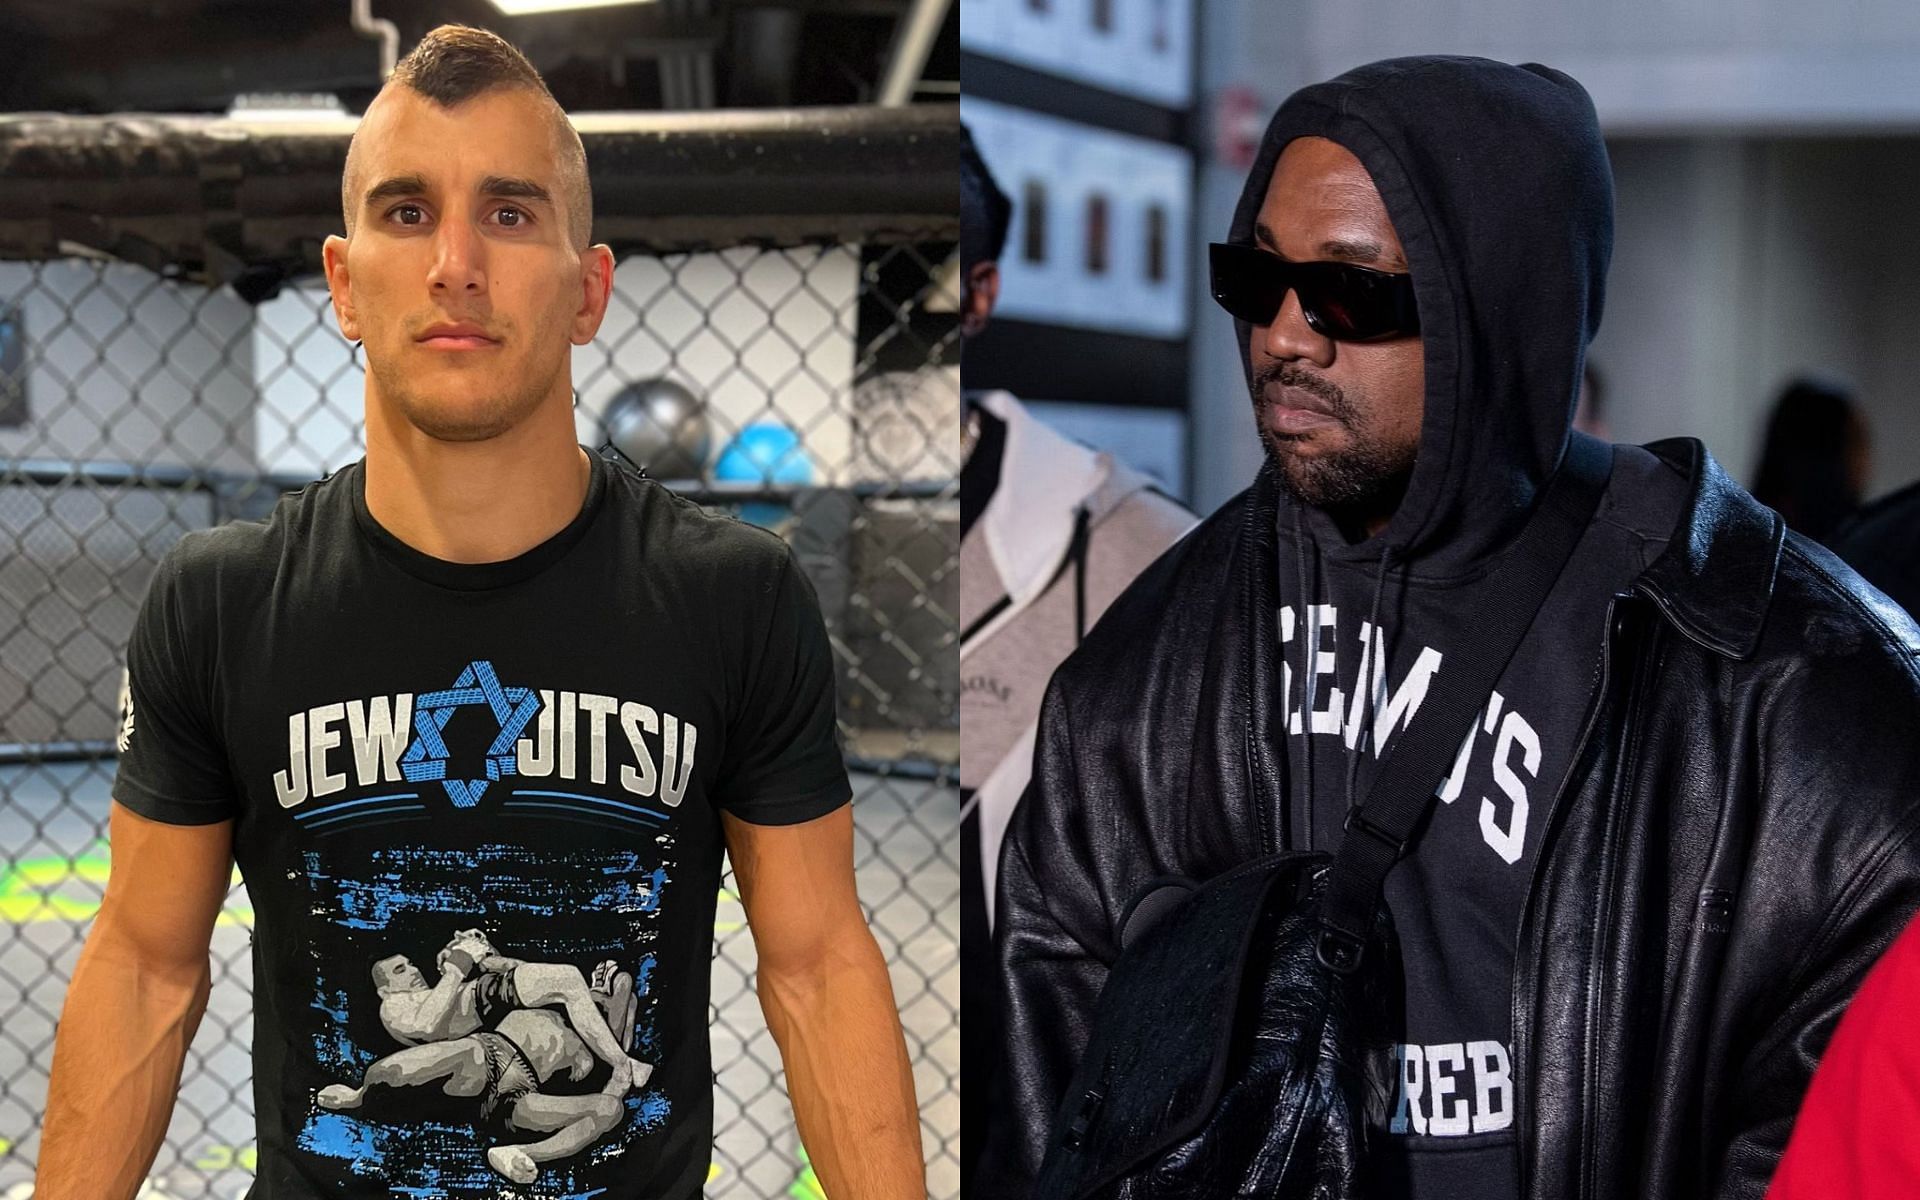 Kanye West: Everything to know about Levy, the Jewish UFC fighter who called-out Kanye West